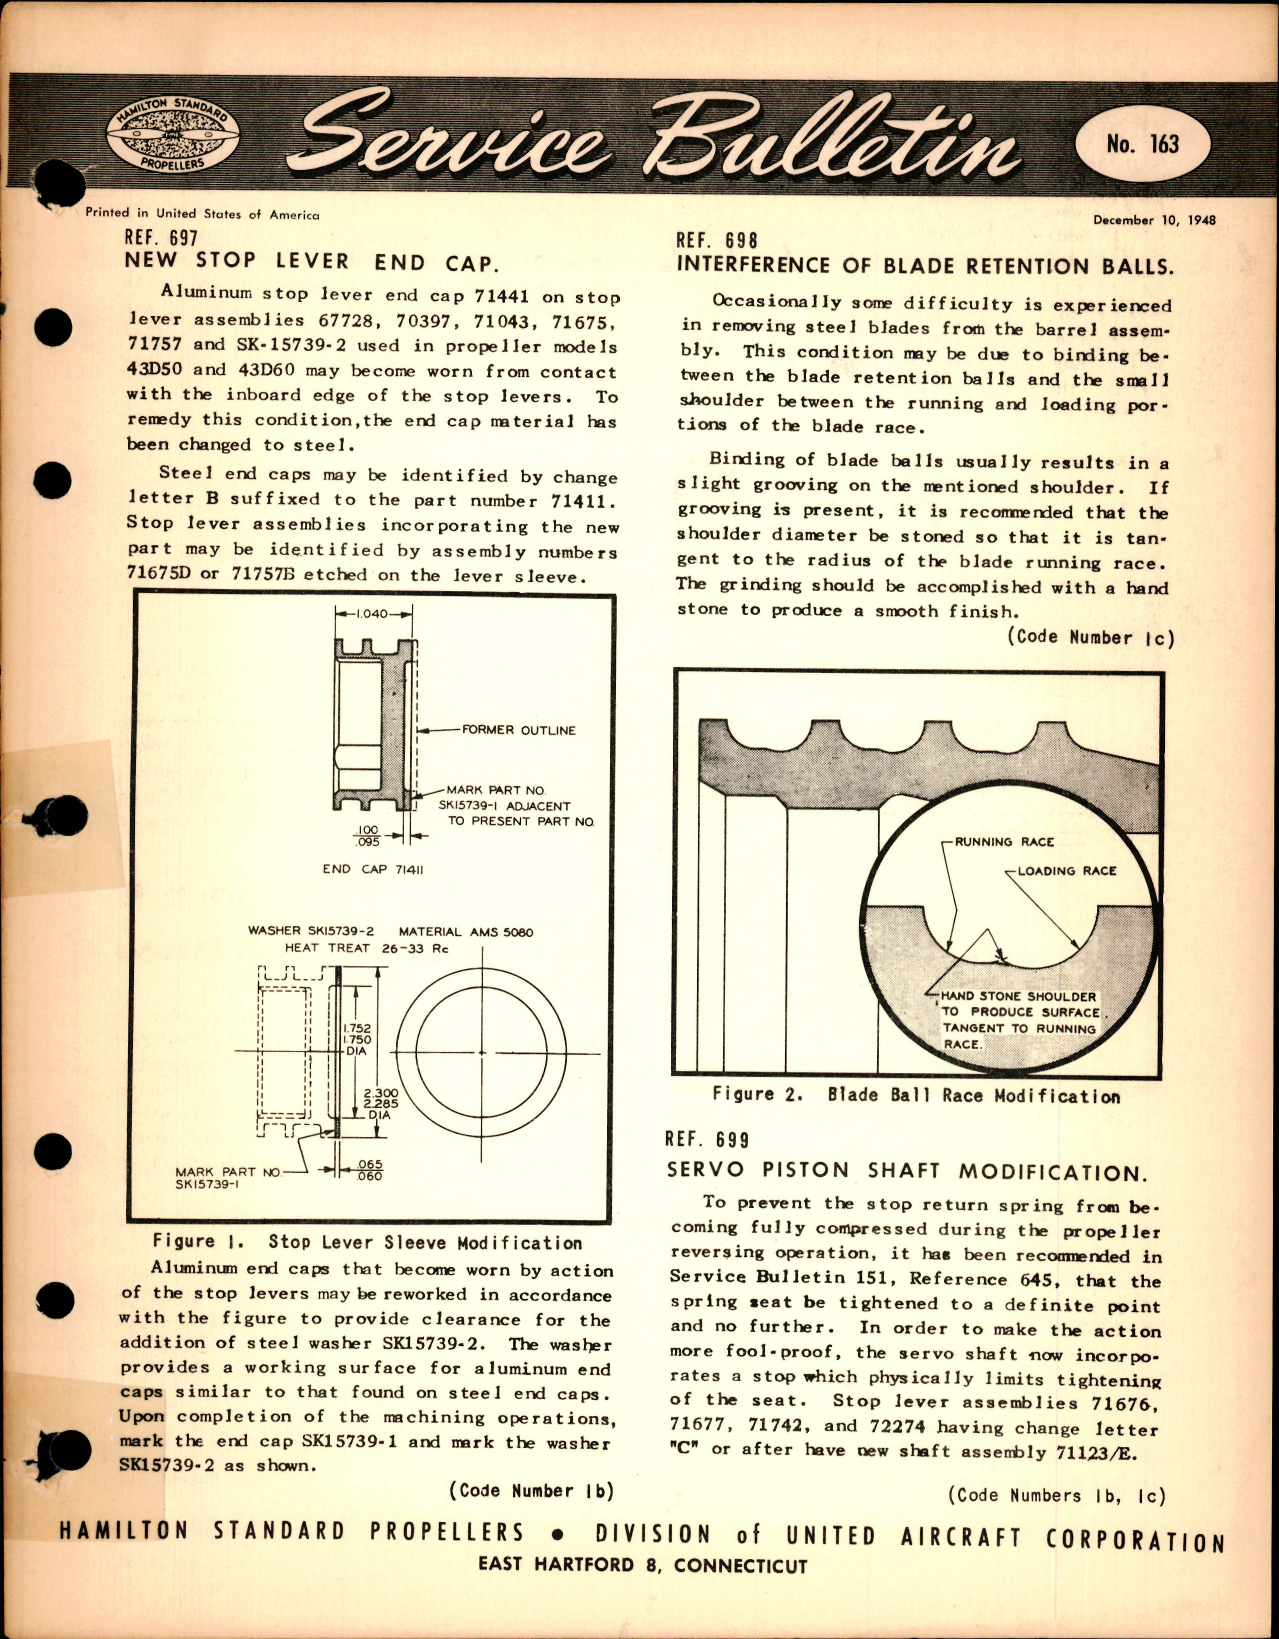 Sample page 1 from AirCorps Library document: New Stop Lever End Cap, Ref 697